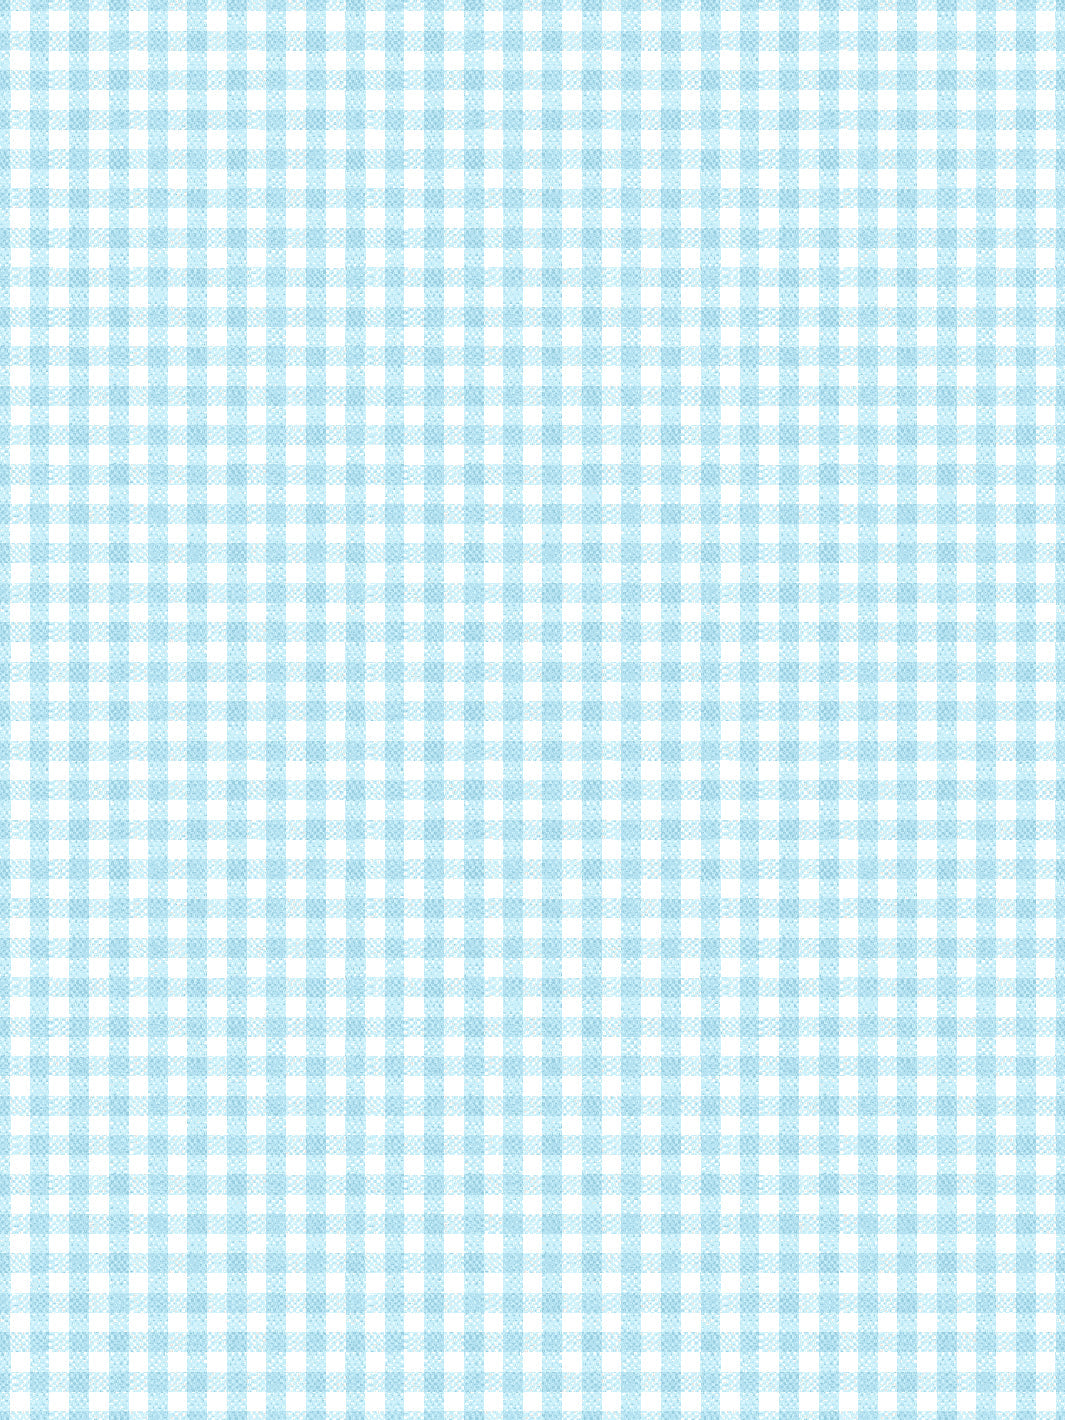 'Pixie Gingham' Wallpaper by Sarah Jessica Parker - Sky